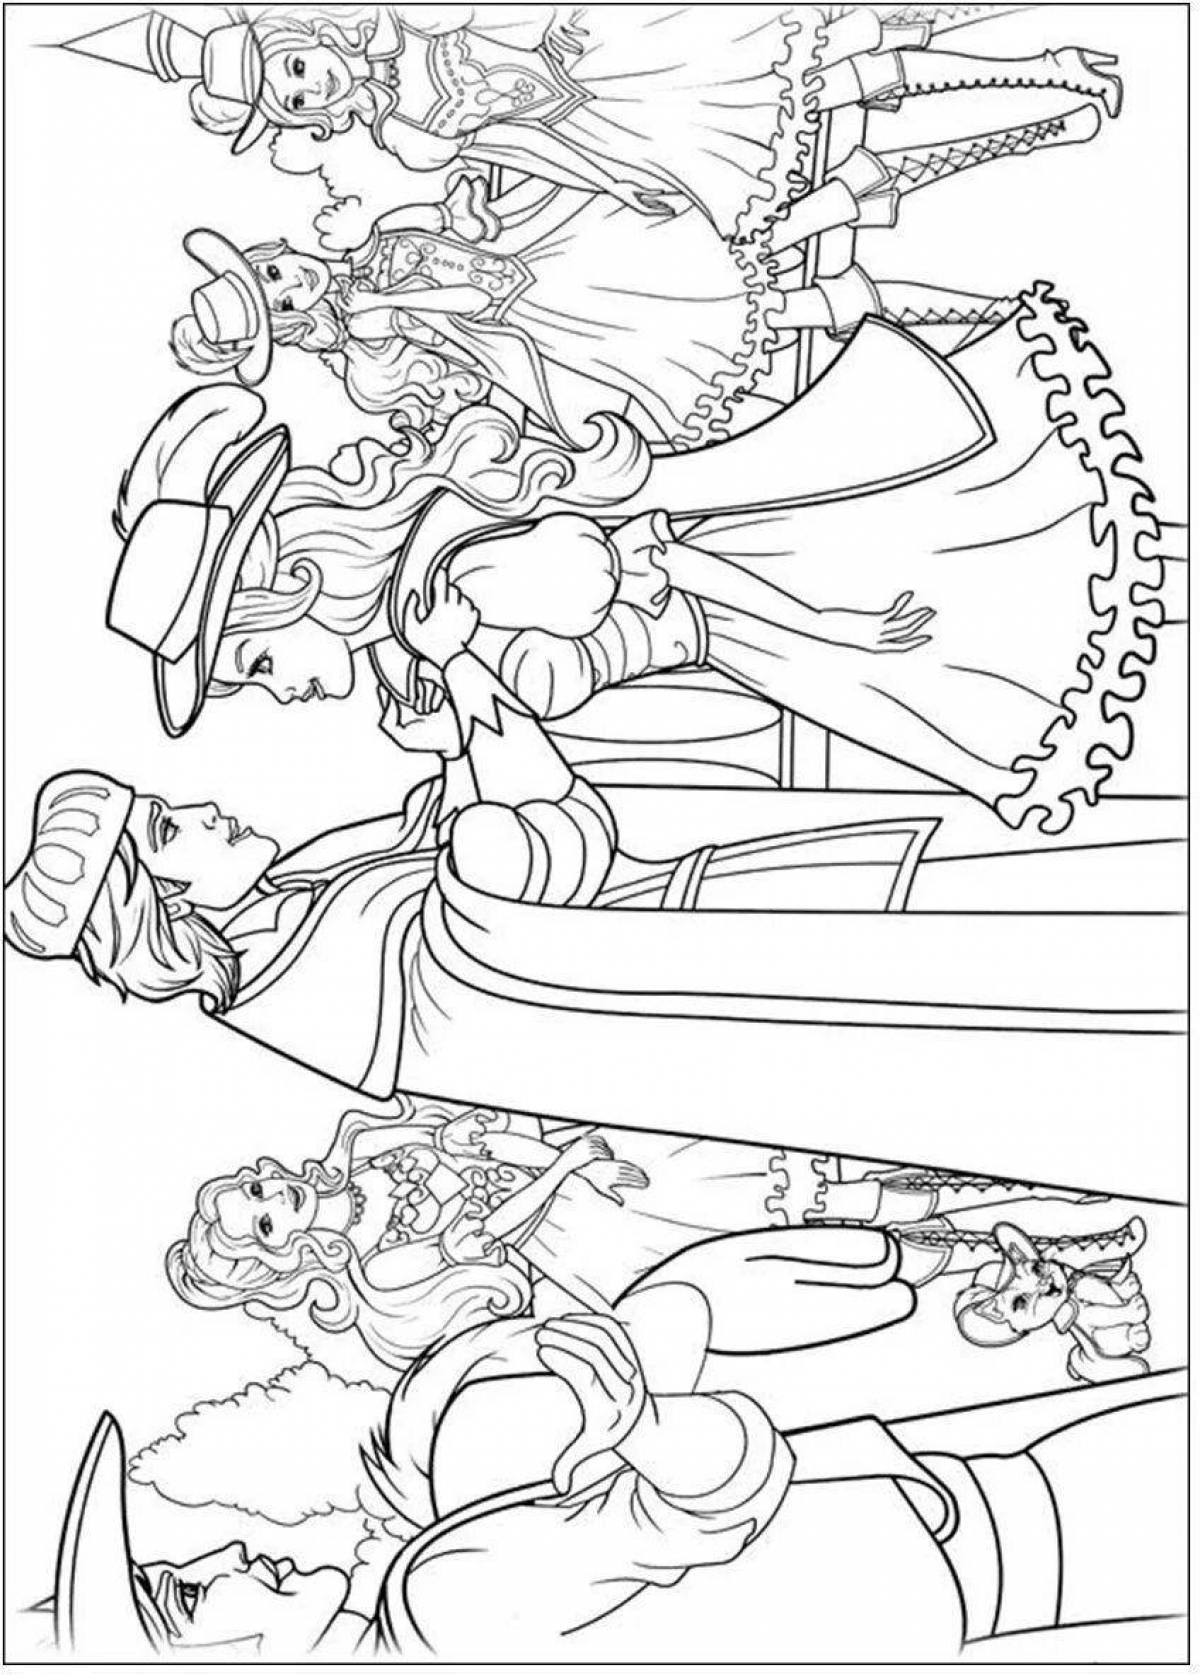 Glorious Musketeers coloring page